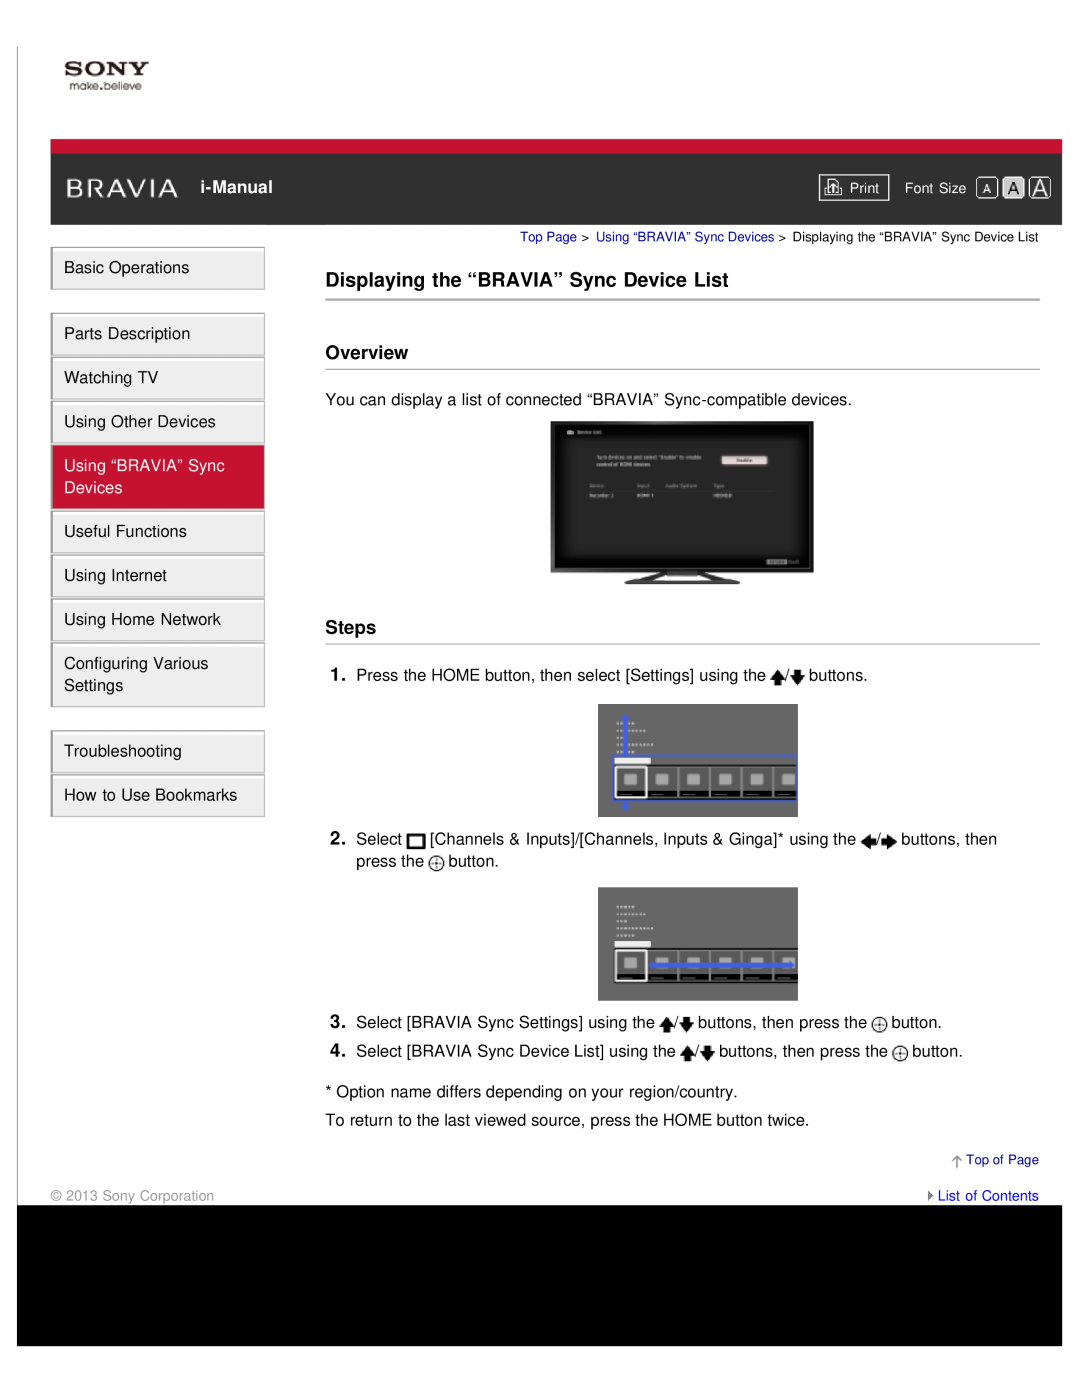 Sony KDL55W900A manual Displaying the “BRAVIA” Sync Device List, Overview, Steps, i-Manual, Using “BRAVIA” Sync Devices 